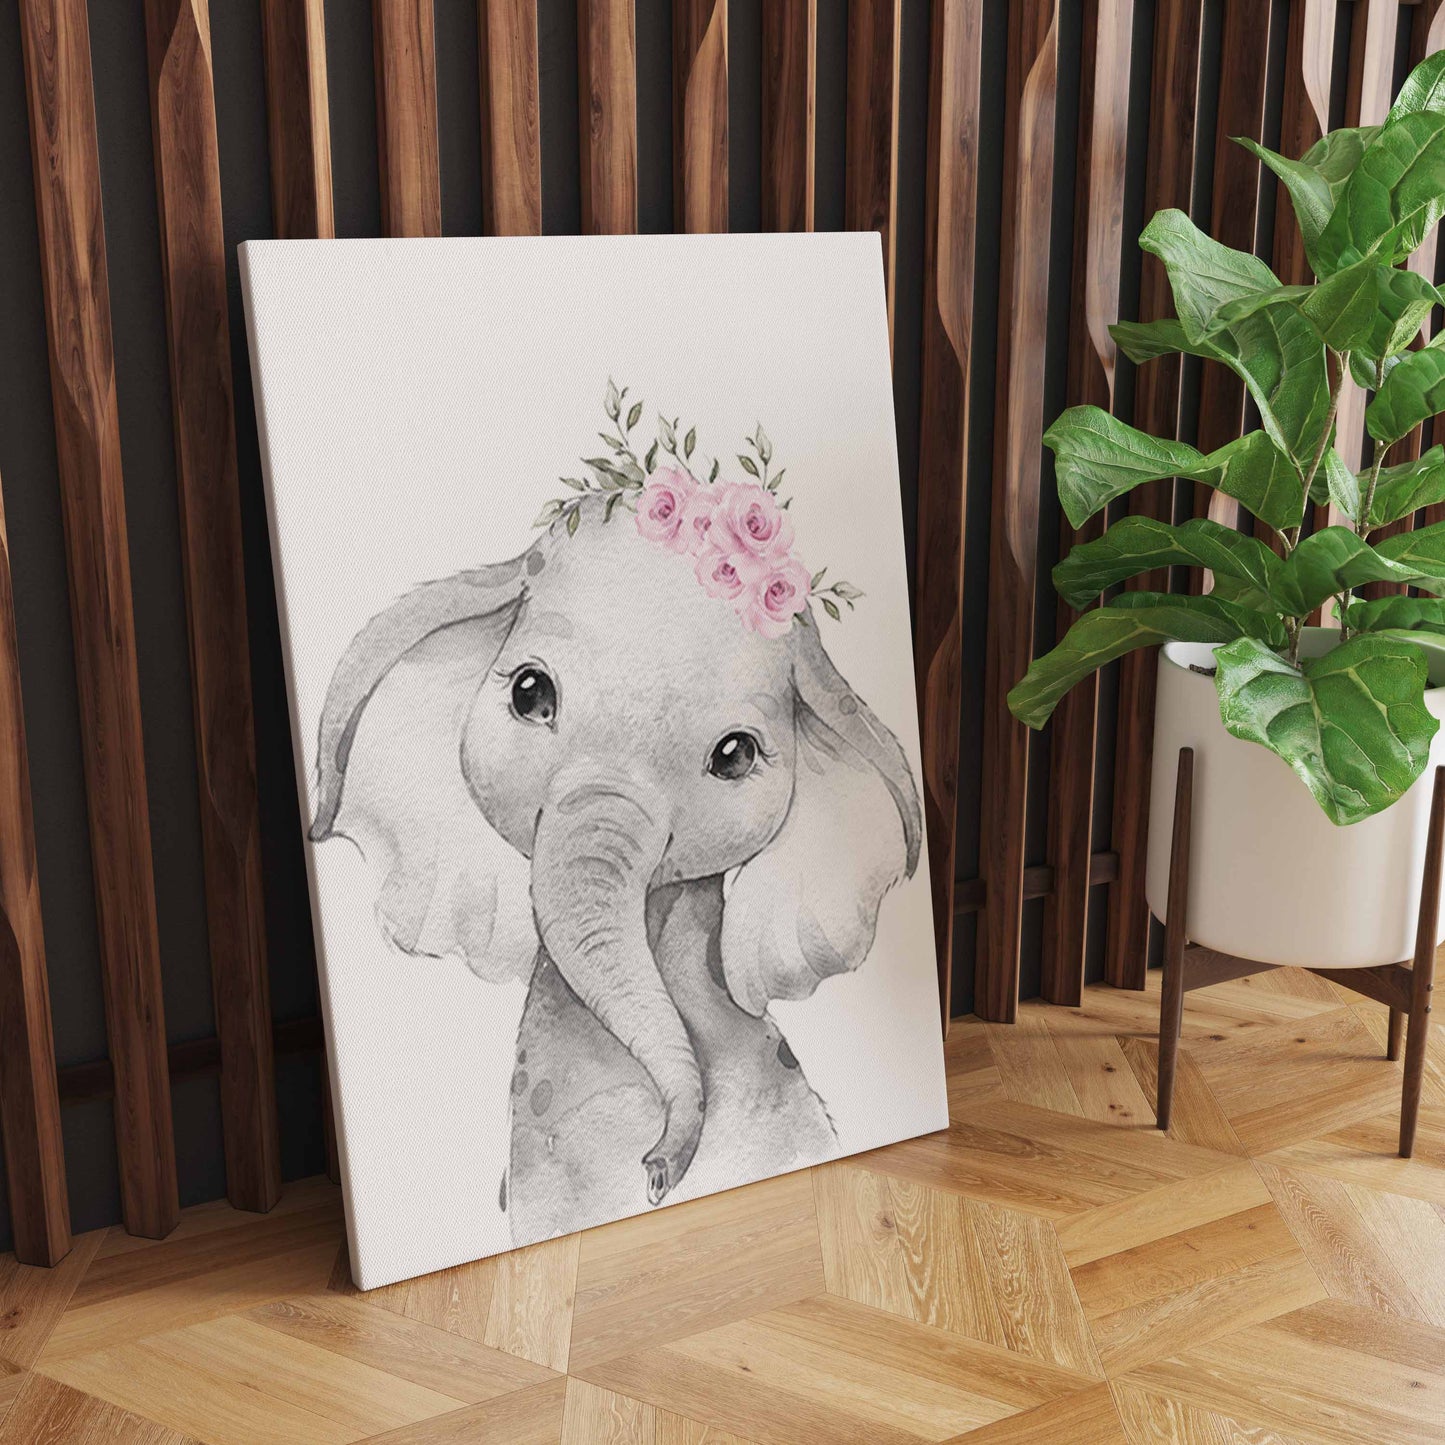 Delightful Cute Animal Poster Decoration: Vibrant, Personalized Wall Art for Kids' Rooms and Nursery Decor S04E12